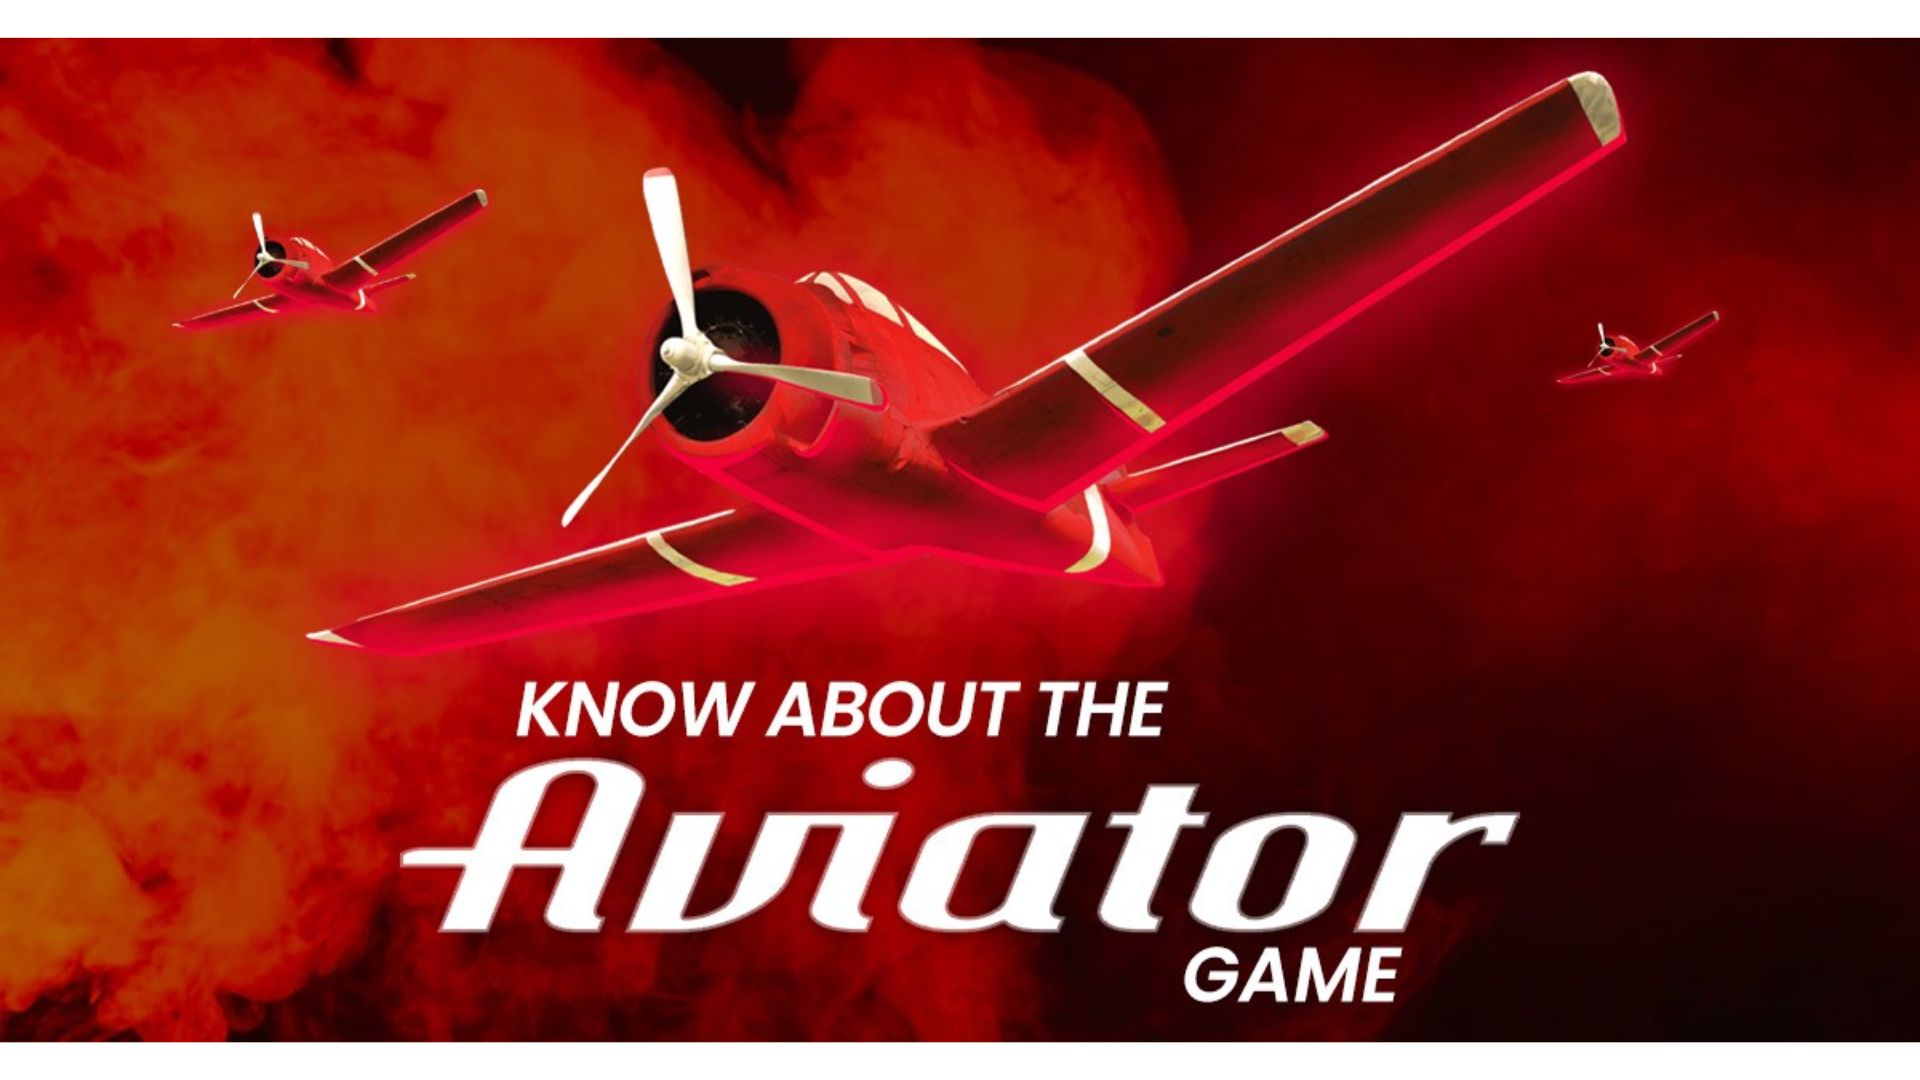 Know about the aviator